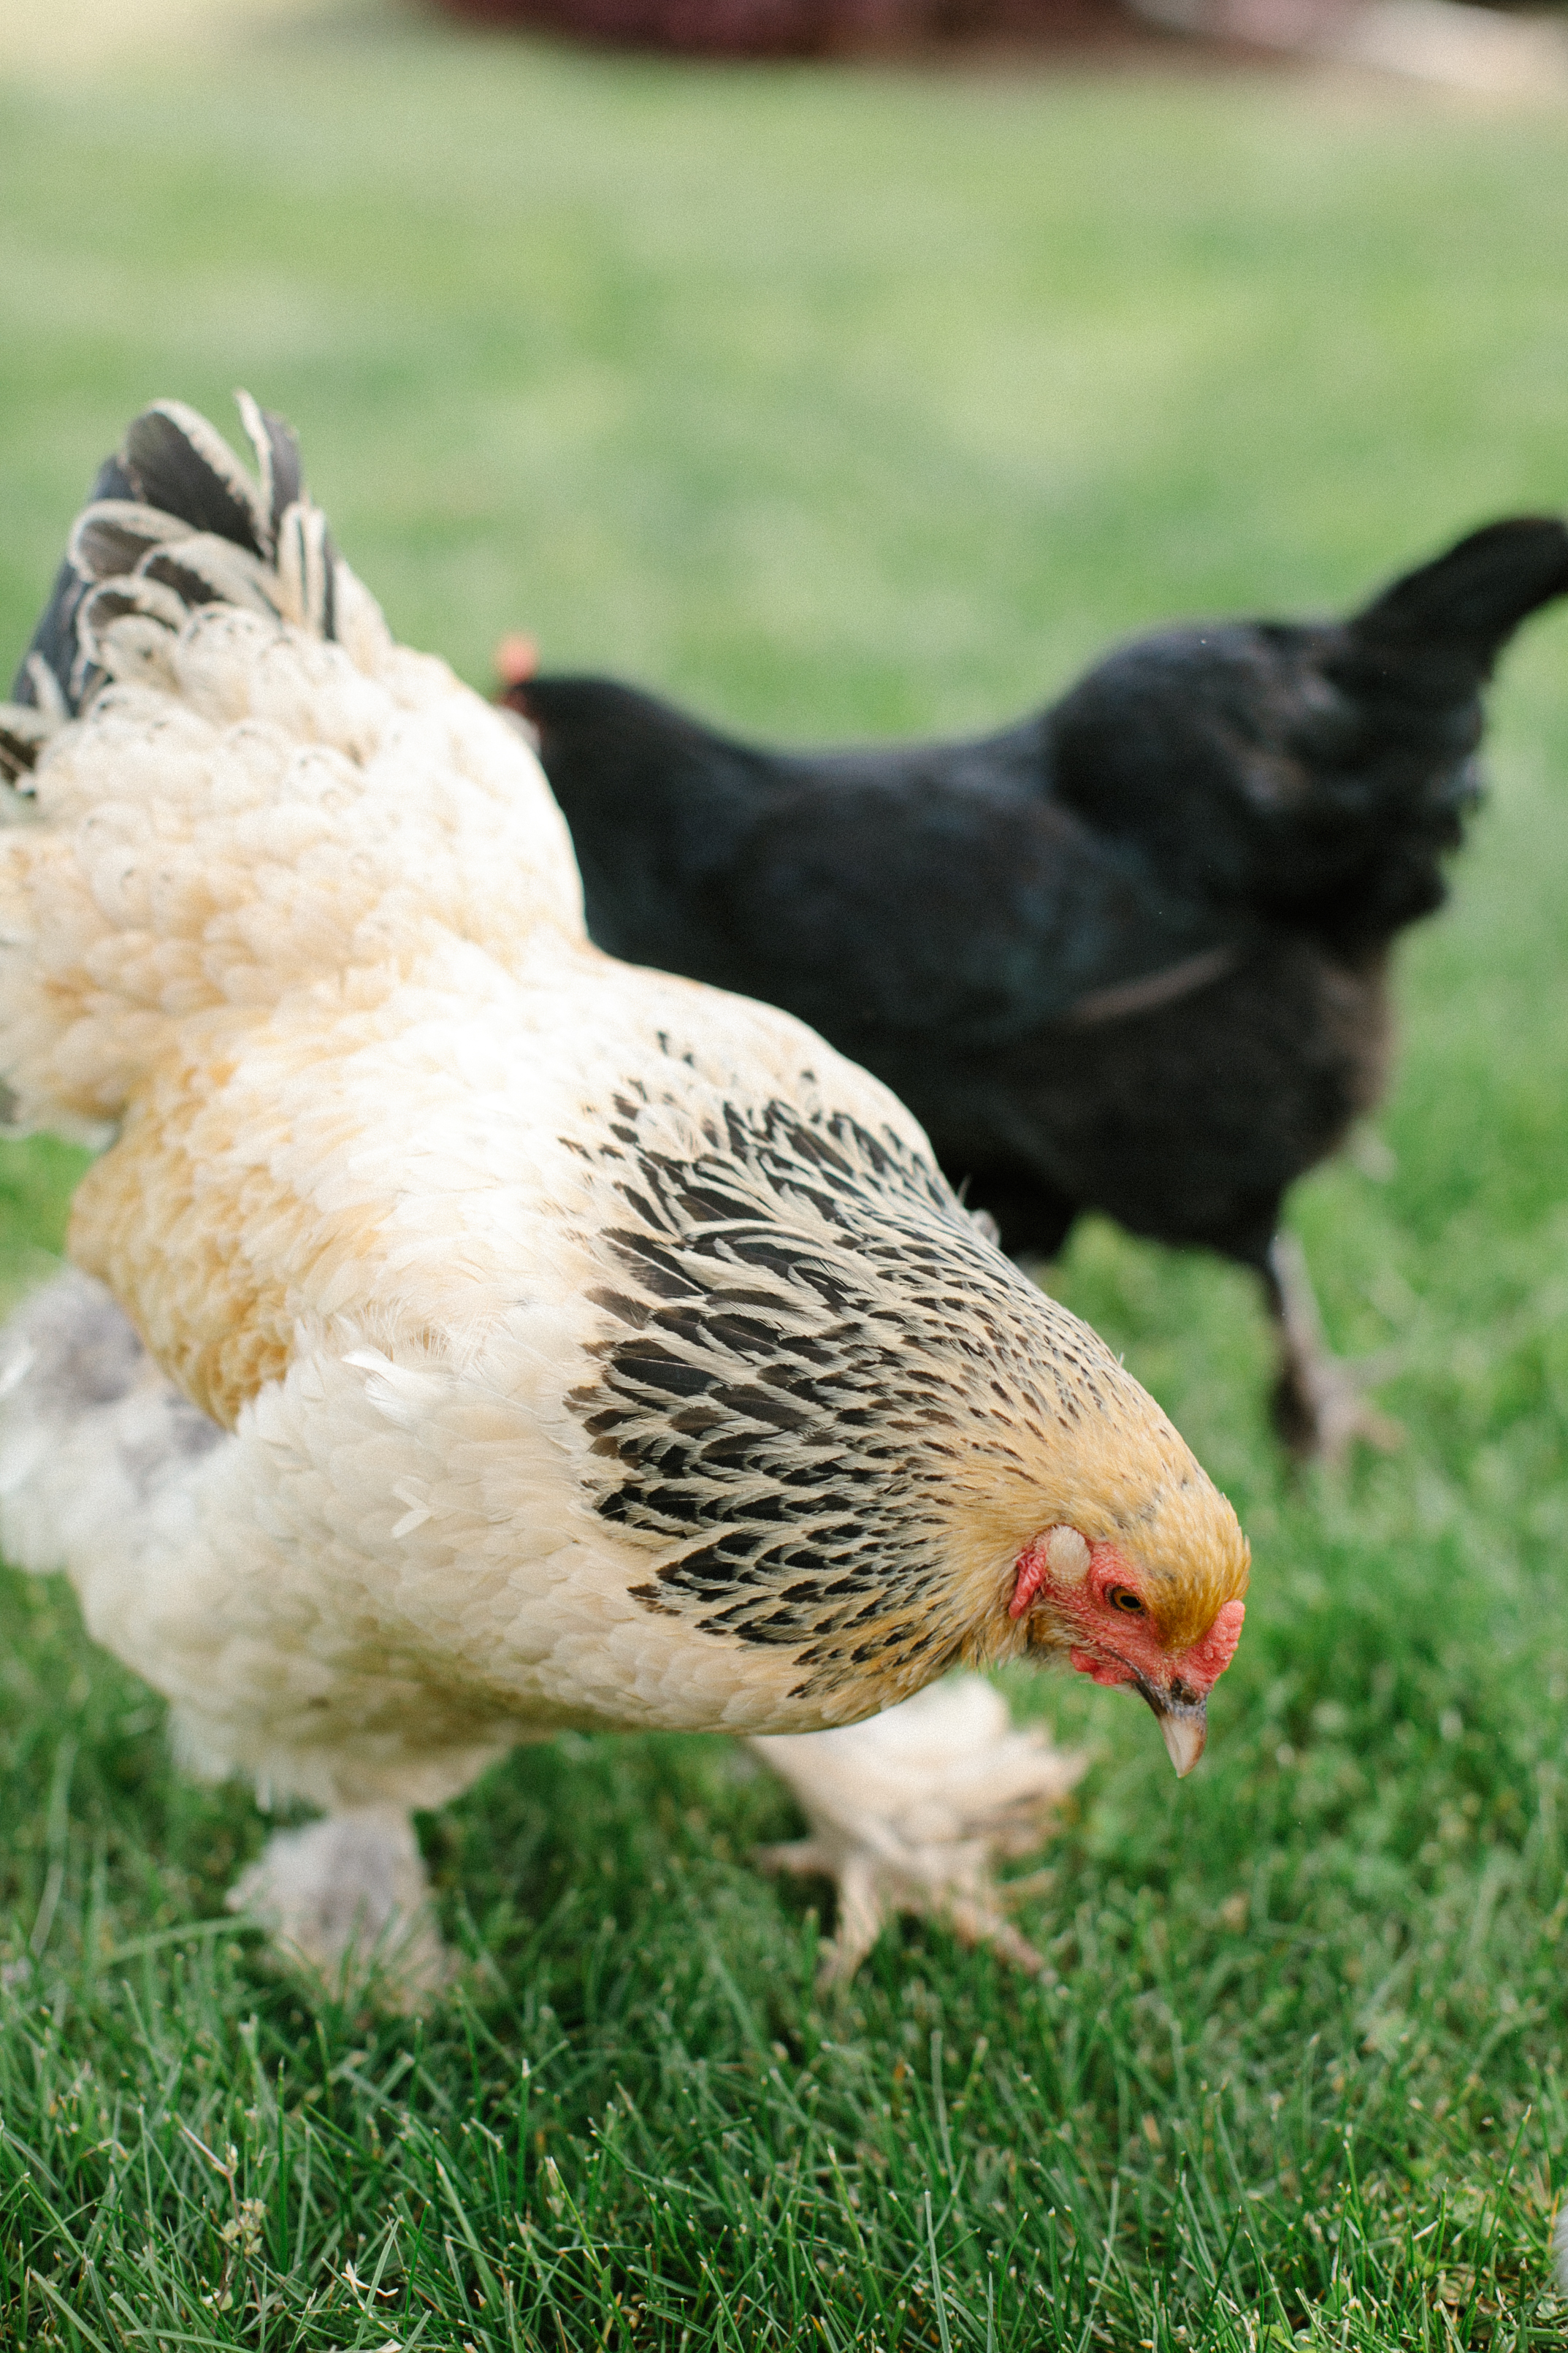 How To Raise Chickens - Everything You Need To Know To Start Your Own Sustainable Chicken Coop - Owning and Raising Chickens - Sustainable Living - Raising Backyard Chickens - DIY Chicken Coop - Chickens At Home - Chickens For Beginners - Communikait by Kait Hanson